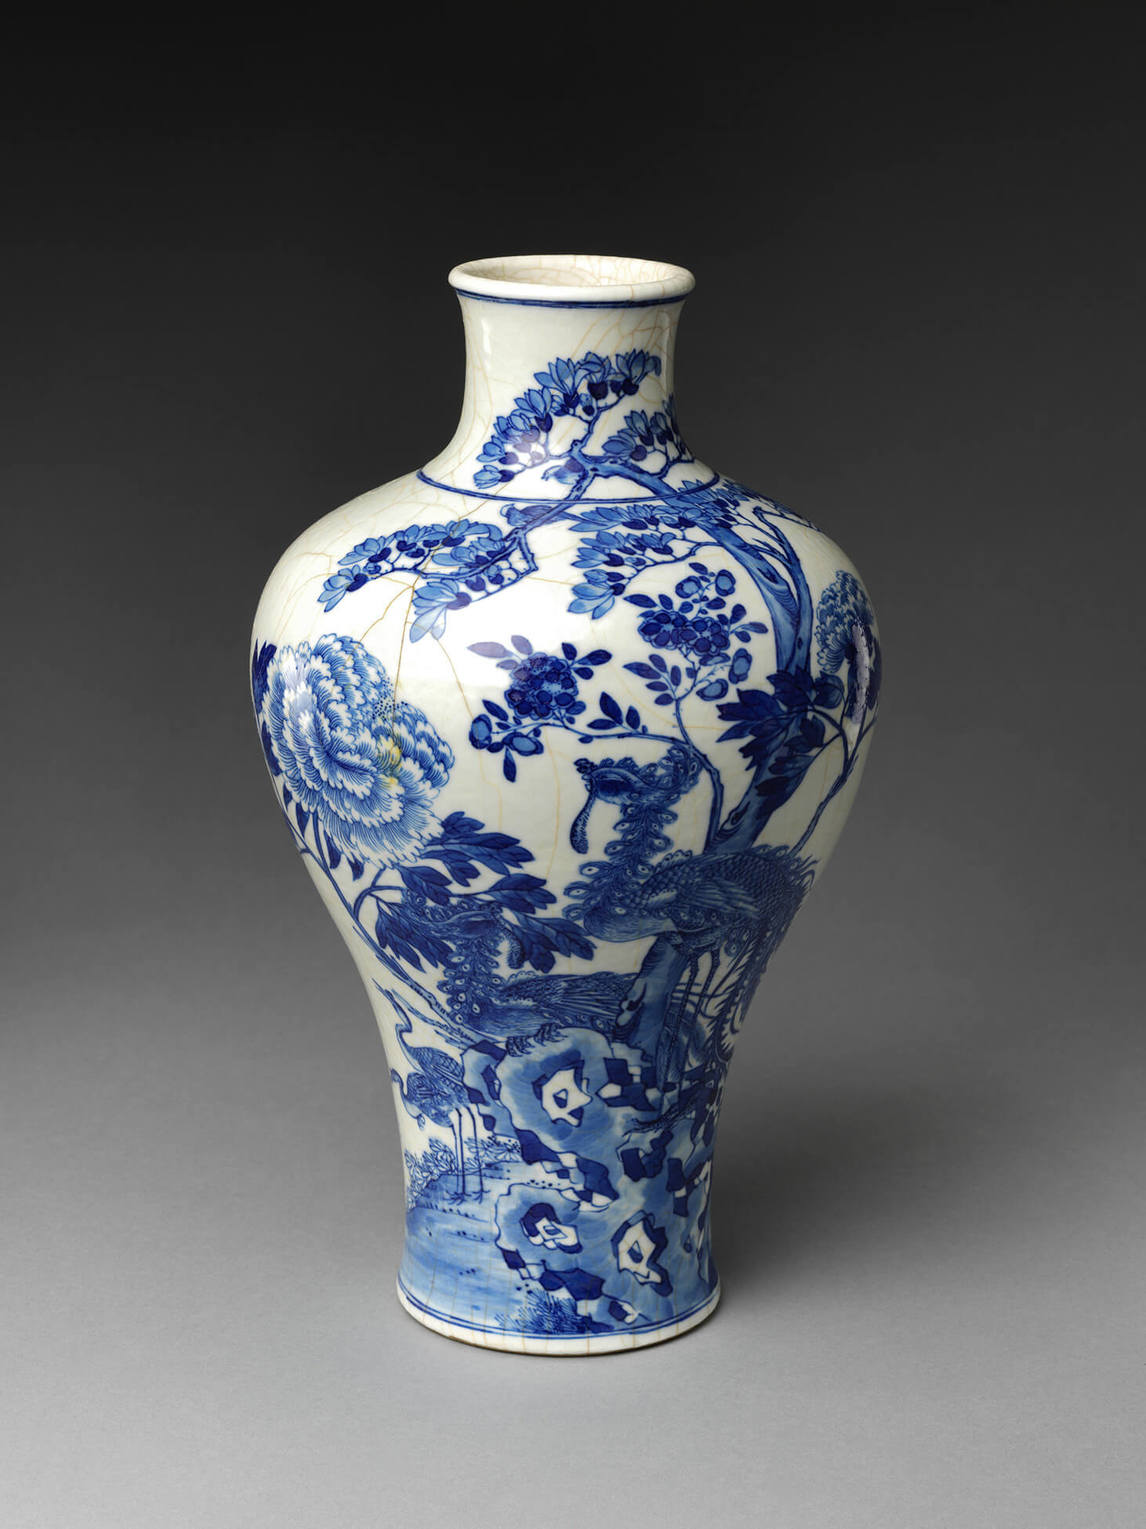 Vase with auspicious animals, Qing dynasty (1644-1911), Kangxi period (1662-1722)